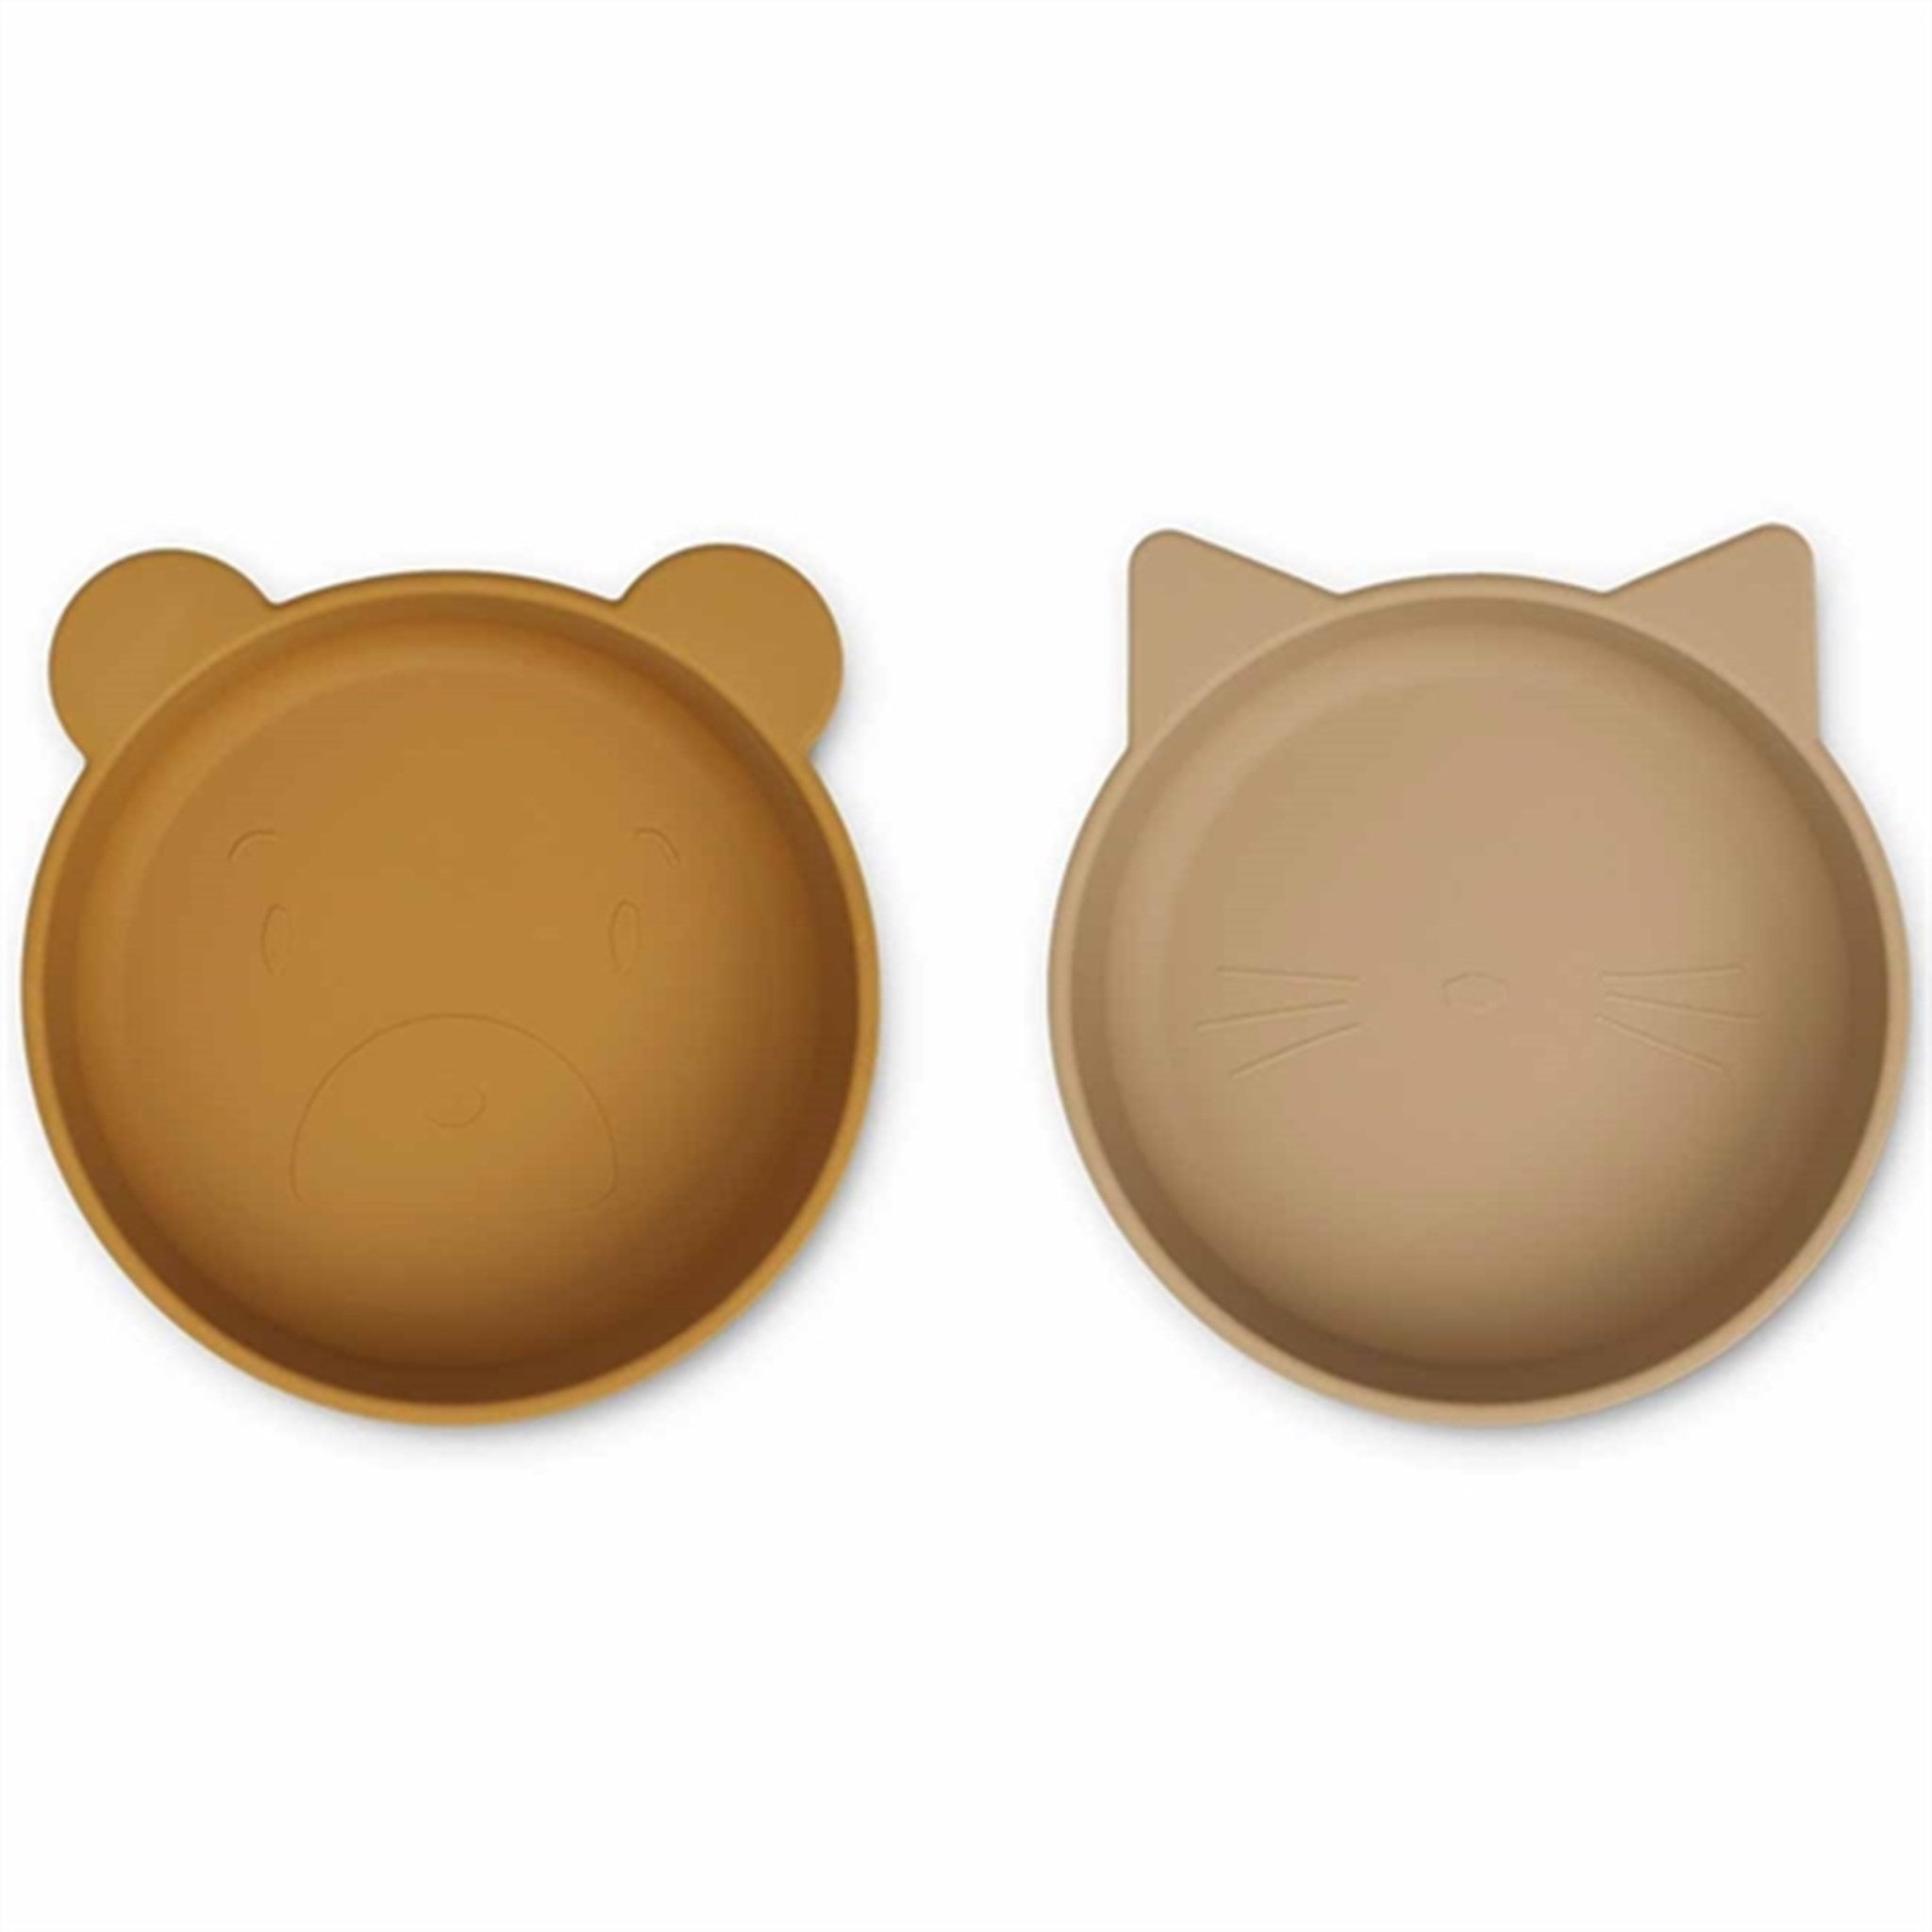 Liewood Vanessa Silicone Bowl 2-pack Golden Caramel Oat Mix